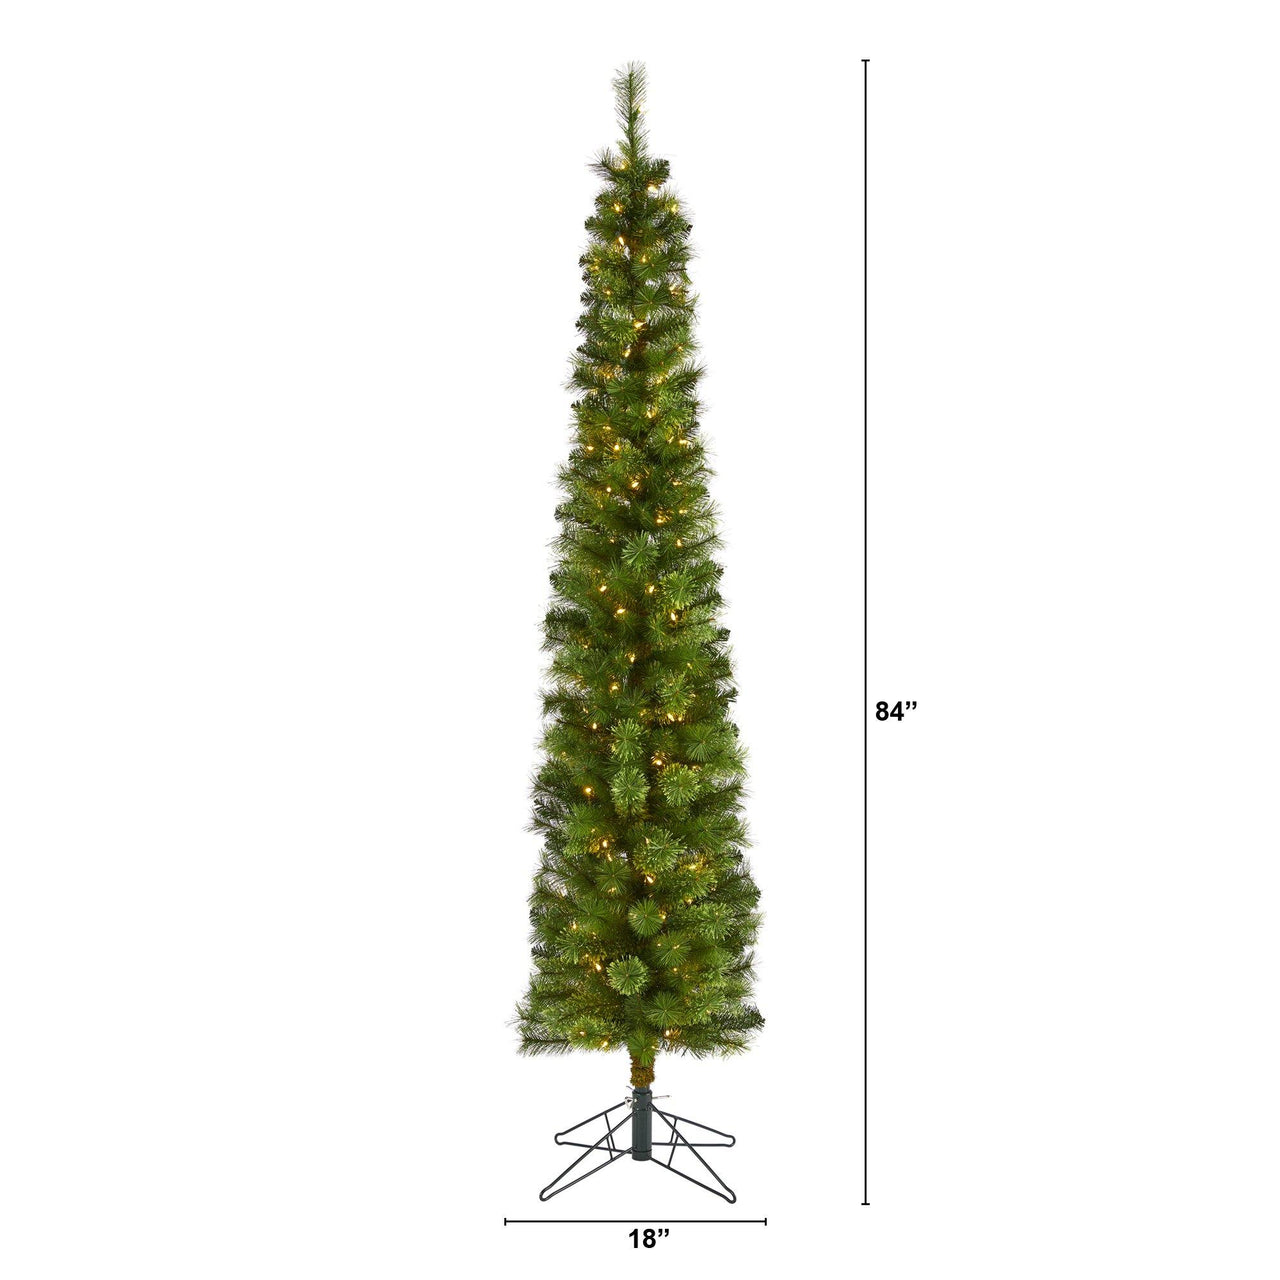 7' Green Pencil Artificial Christmas Tree with 150 Clear (Multifunction) LED Lights and 338 Bendable Branches - The Fox Decor